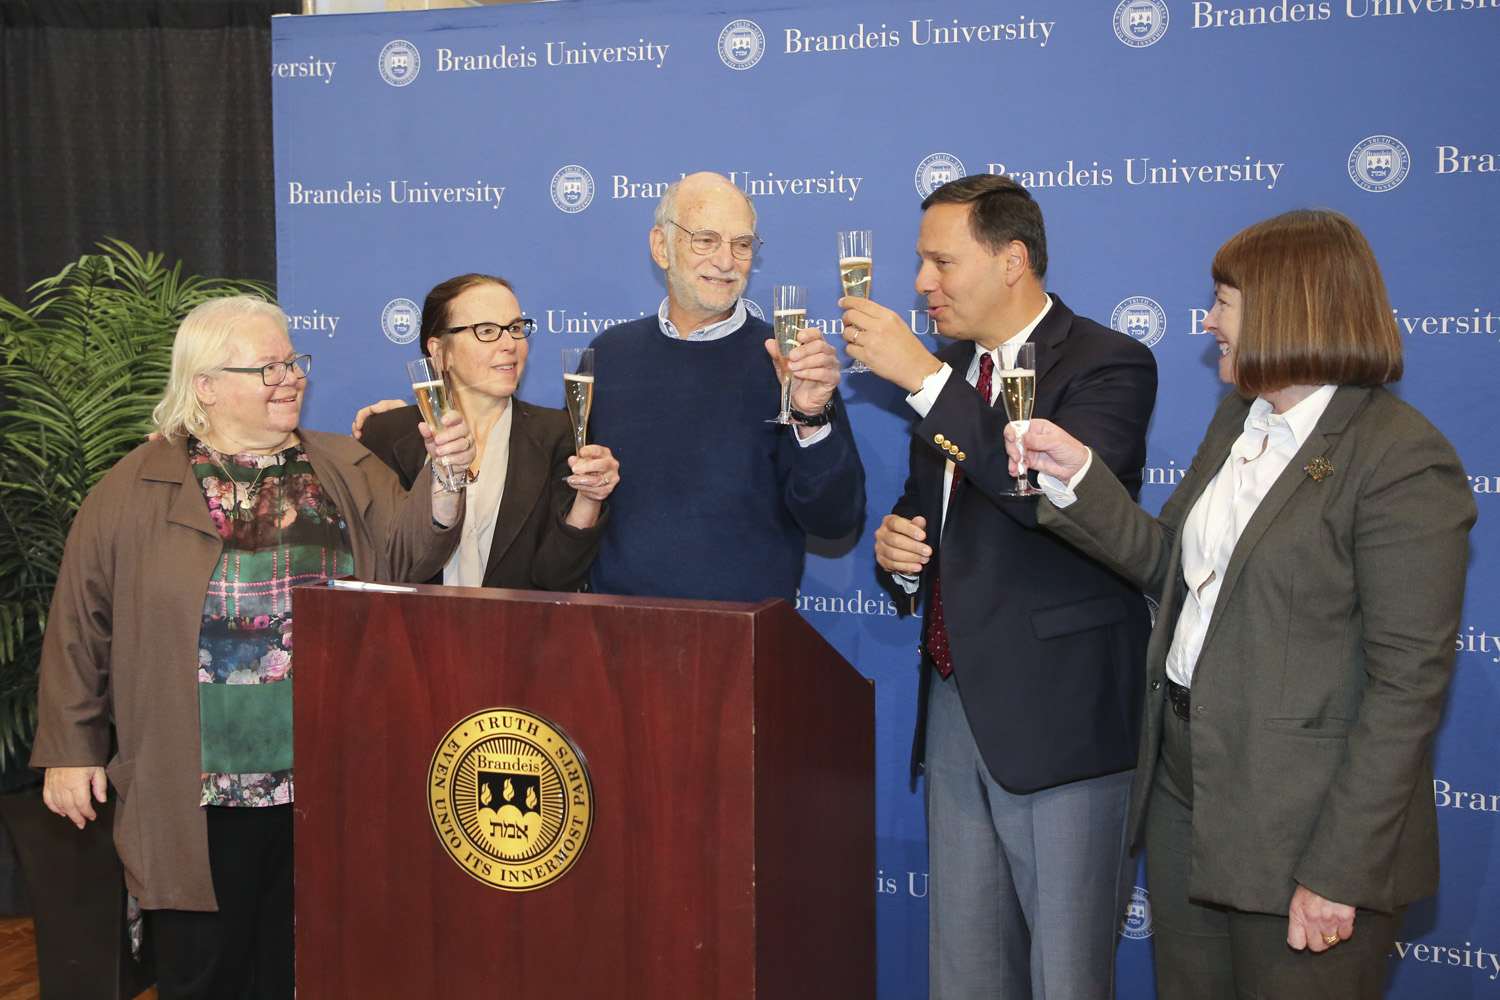 President Liebowitz give Rosbash a champagne toast 